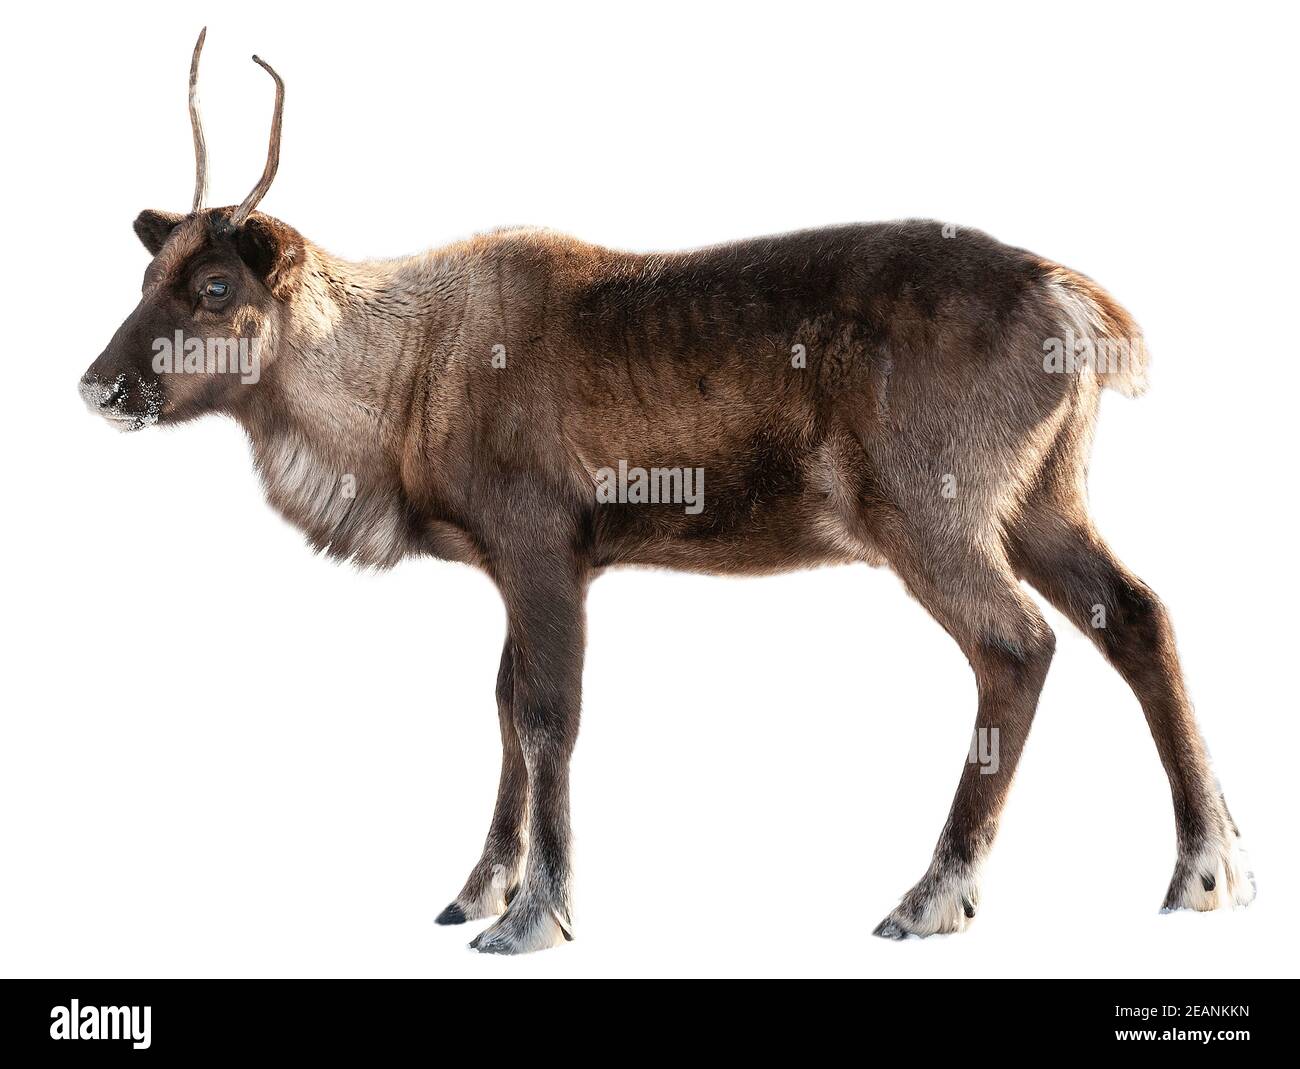 The image of a northern deer on a white background Stock Photo